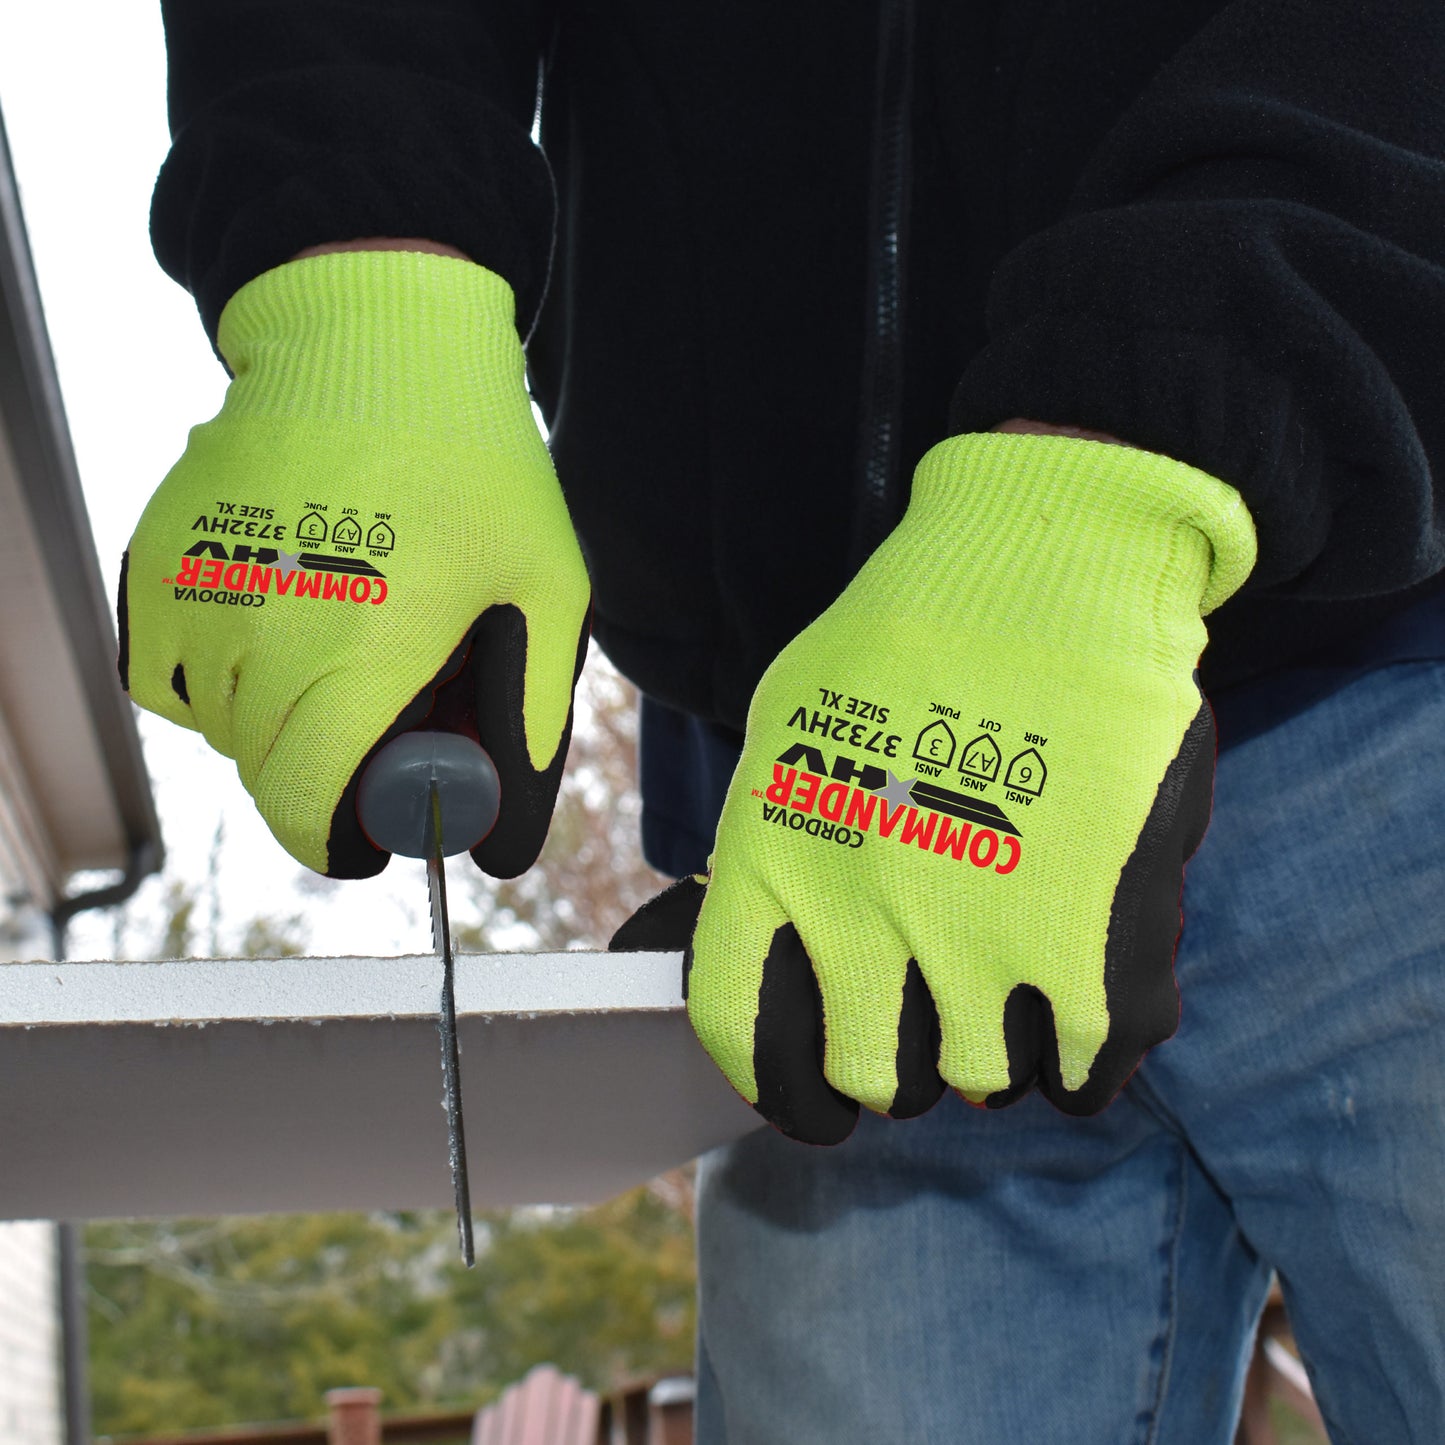 Cut-Resistant Gloves, ANSI Cut Level A7, High-Visibility